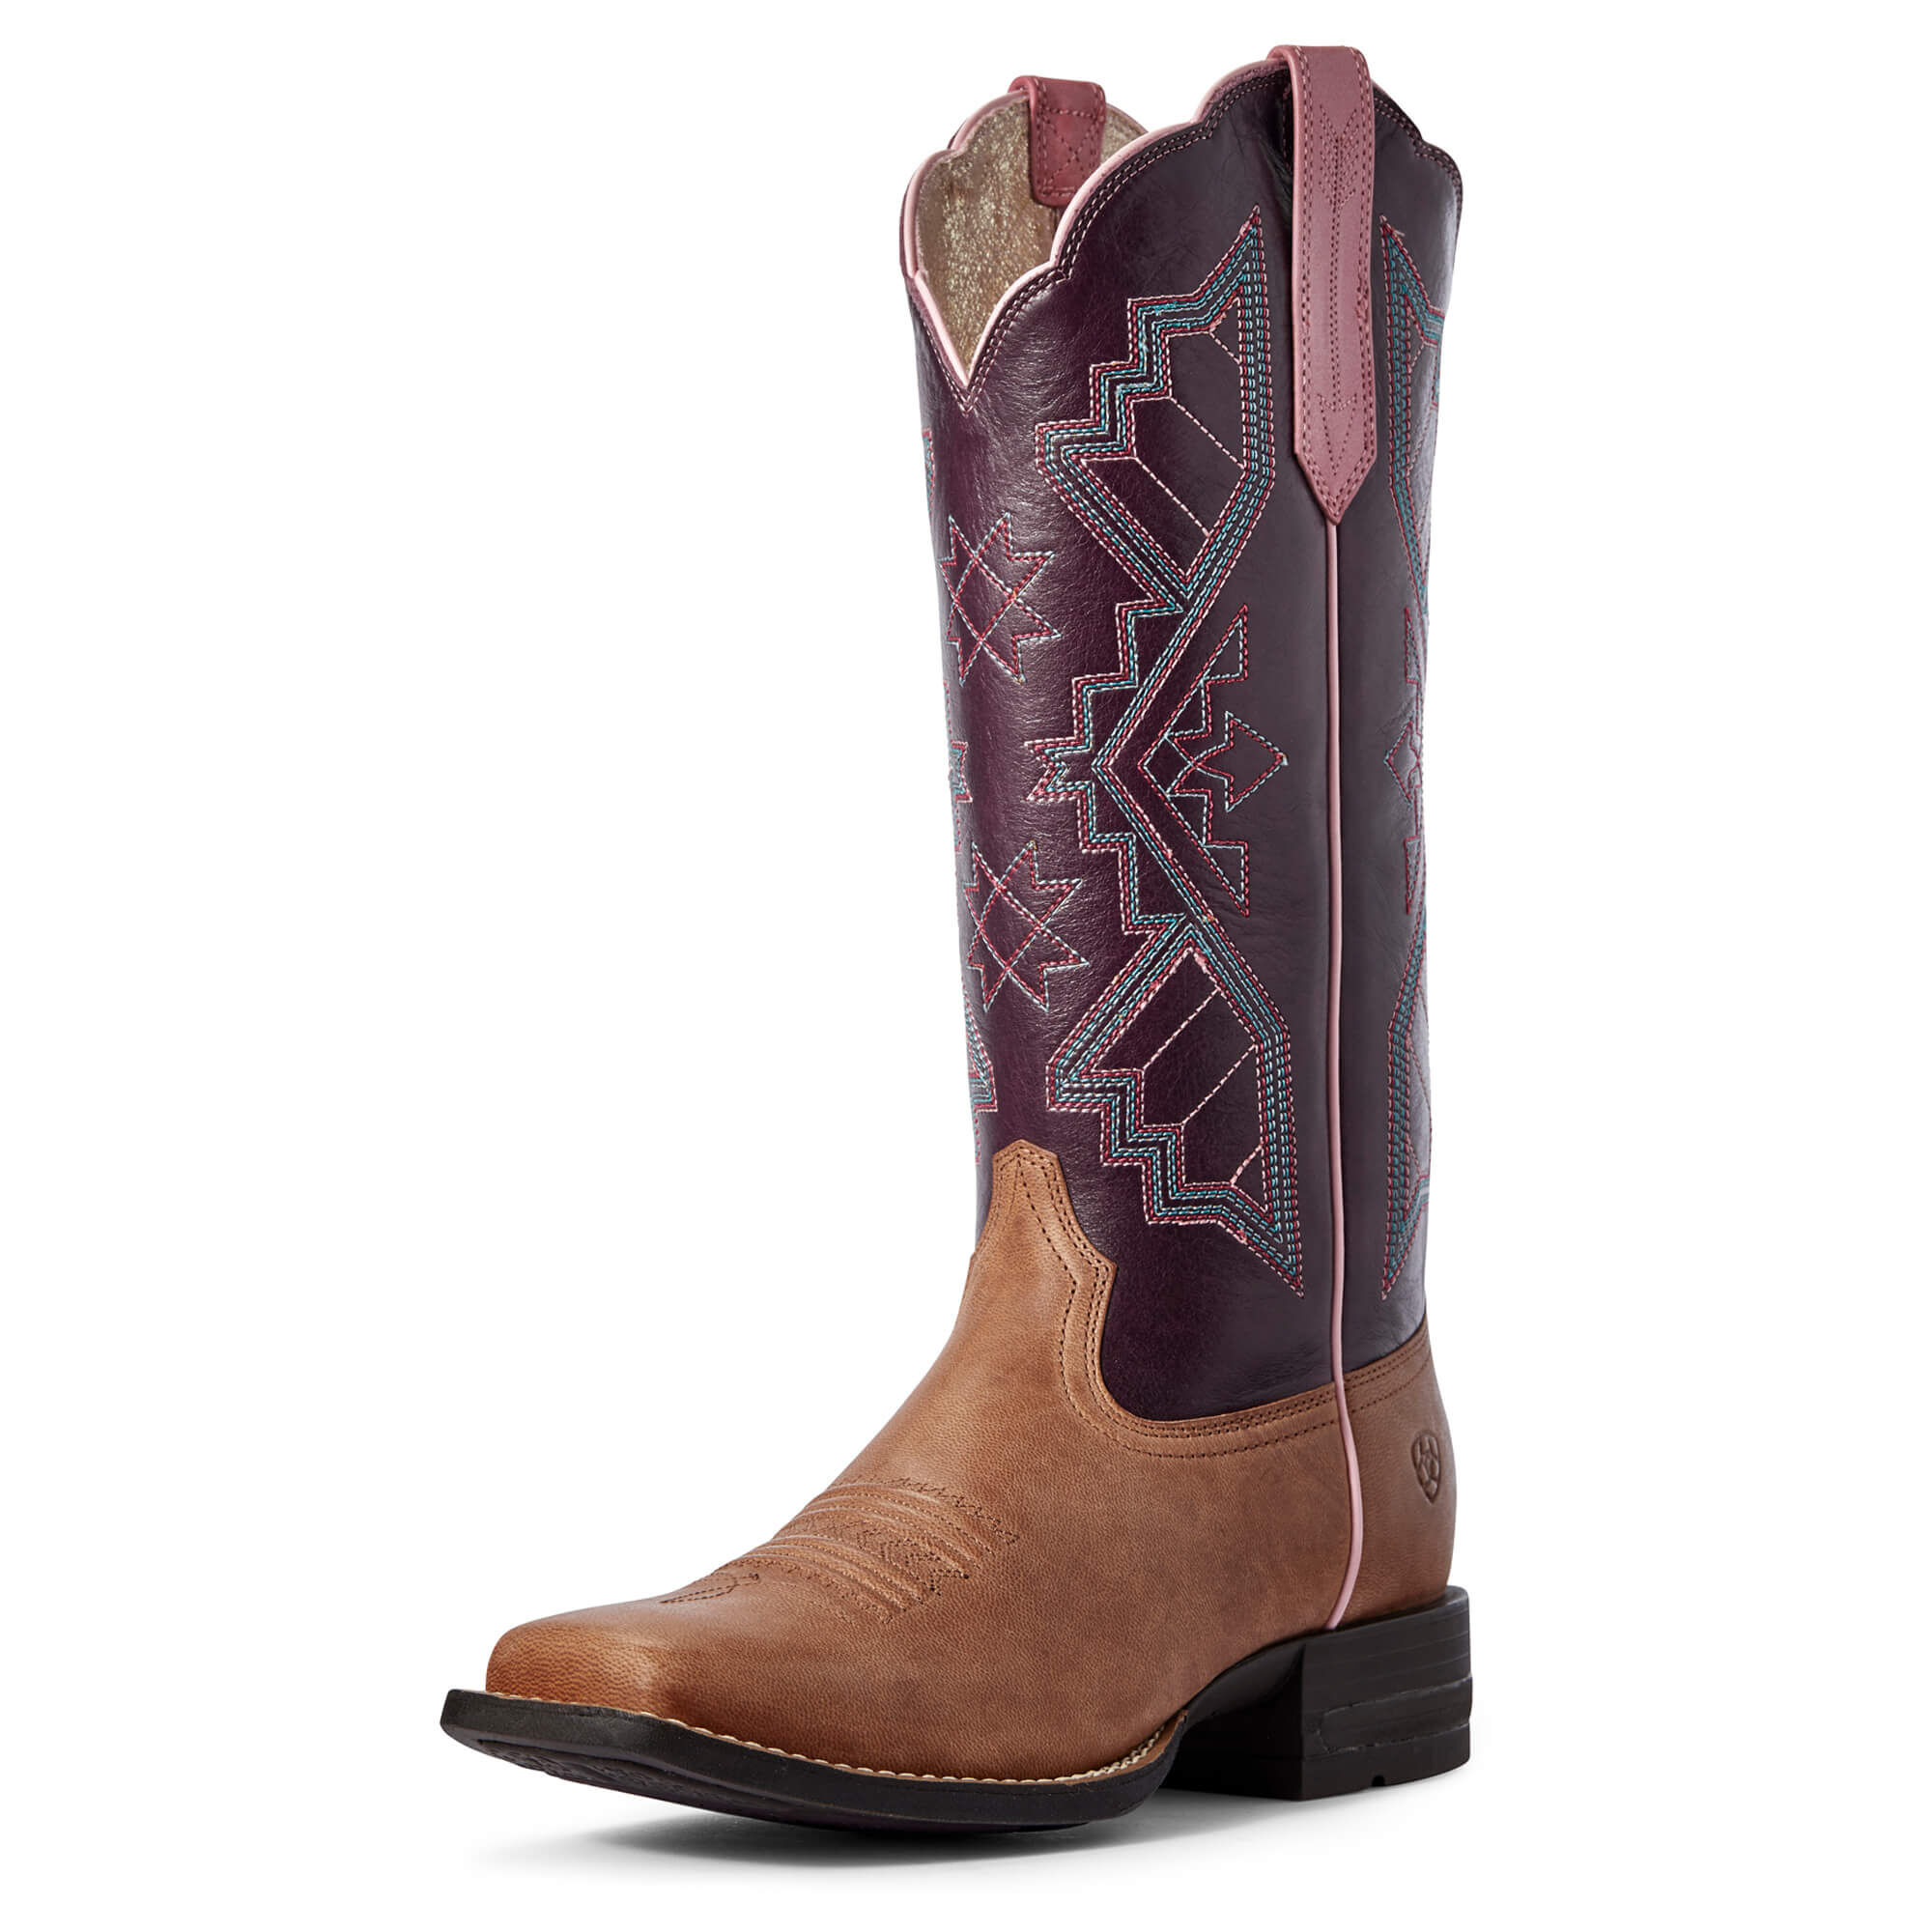 Women's Jackpot Western Boots in Sandstone Leather  by Ariat